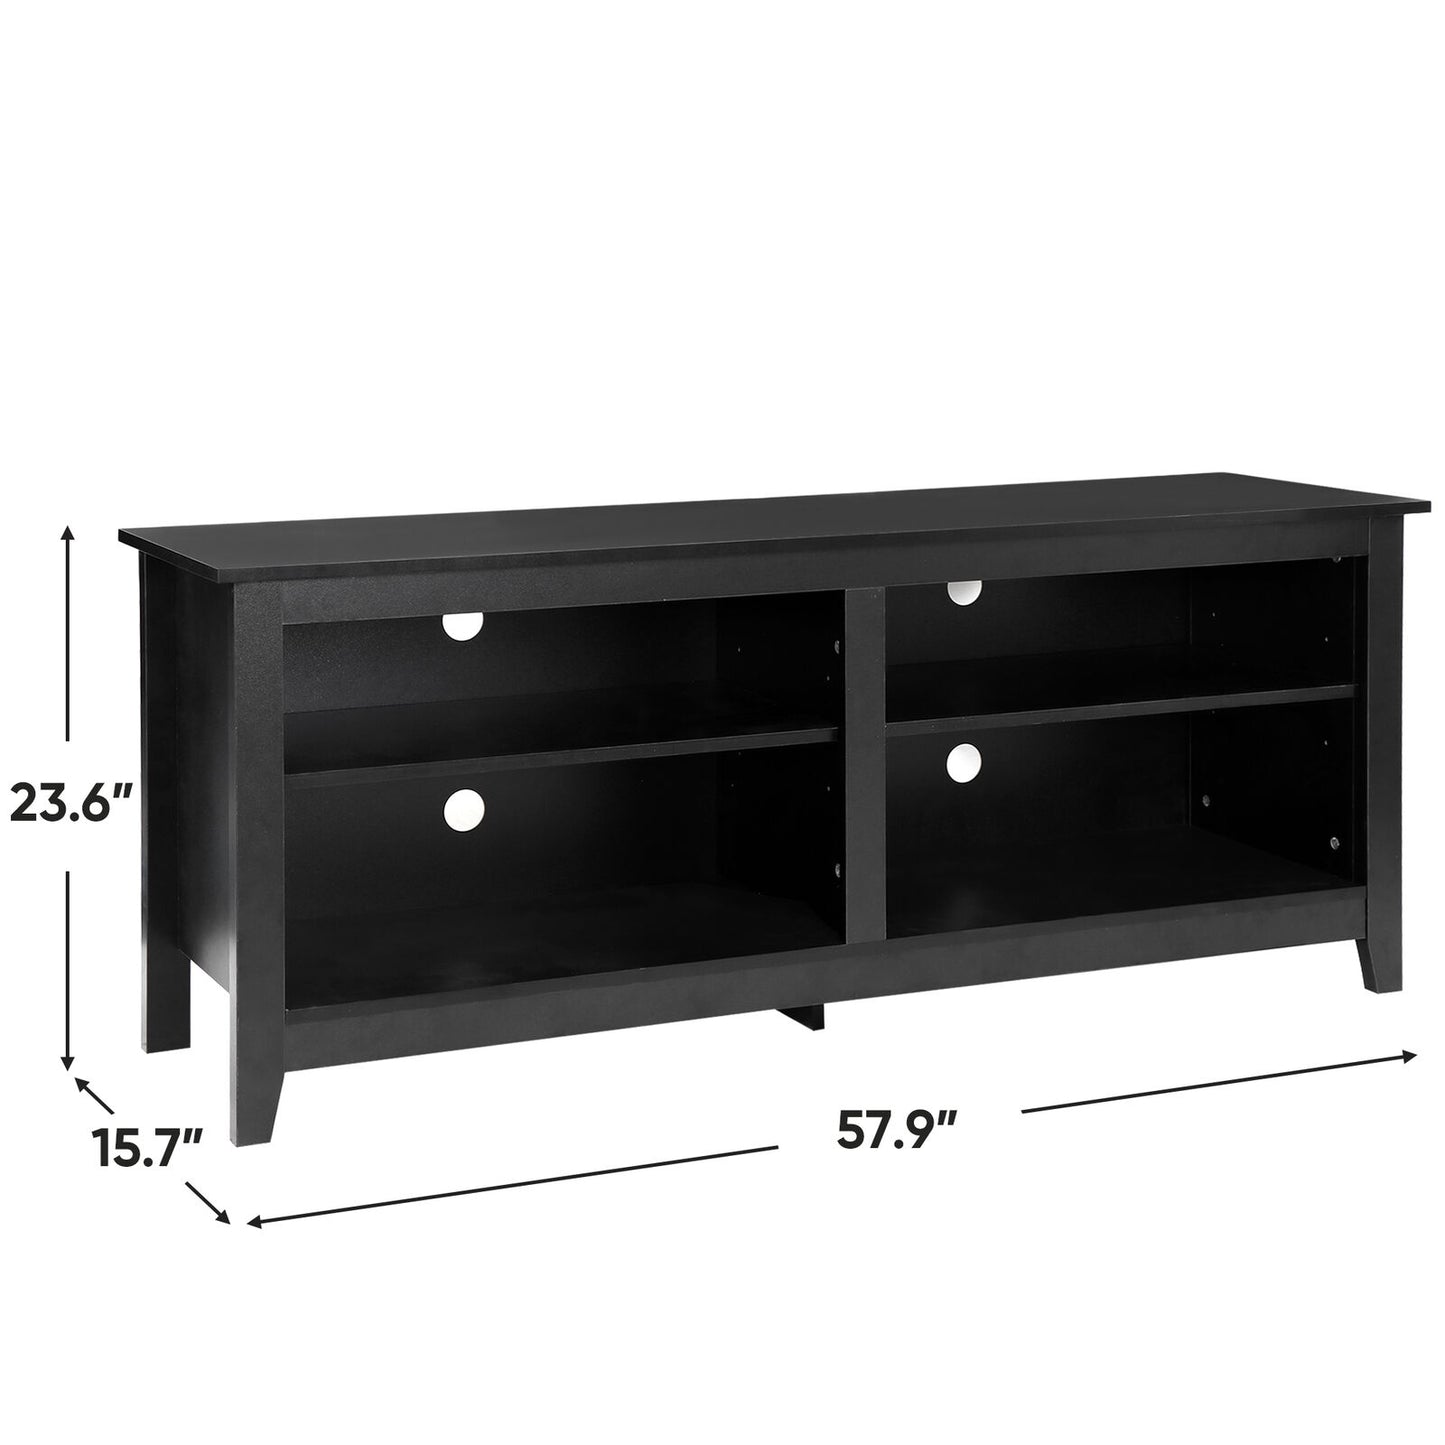 58" TV Stand for 65 inch TV Media Cabinet Console Storage W/Adjustable Shelves